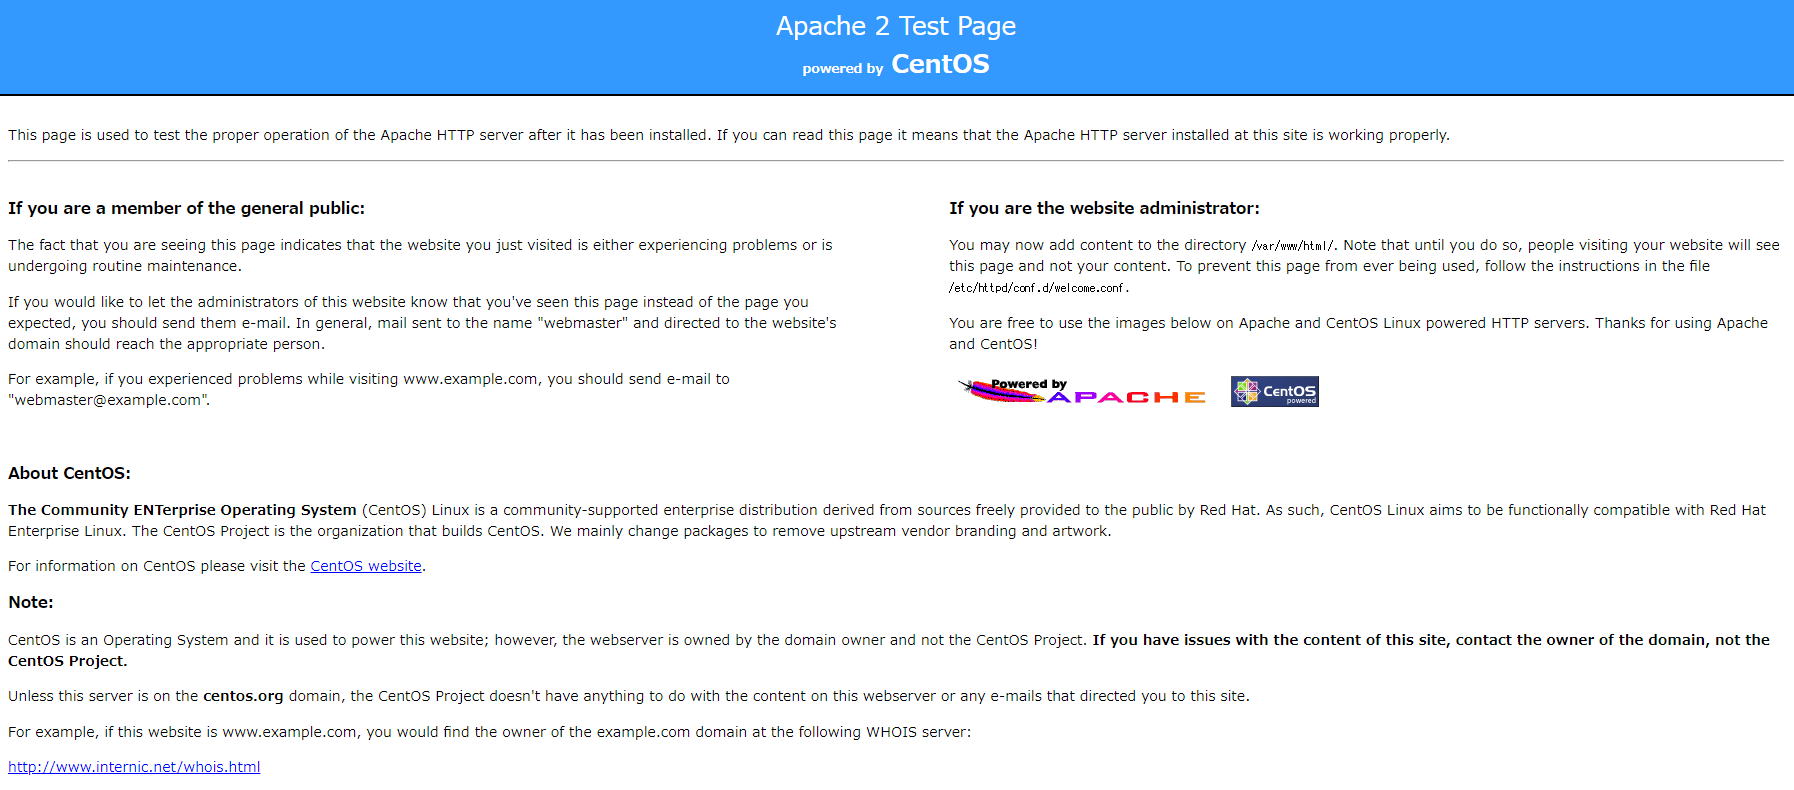 FireShot Capture 75 - Apache HTTP Server Test Page powered by CentOS - http___localhost_8080_.png